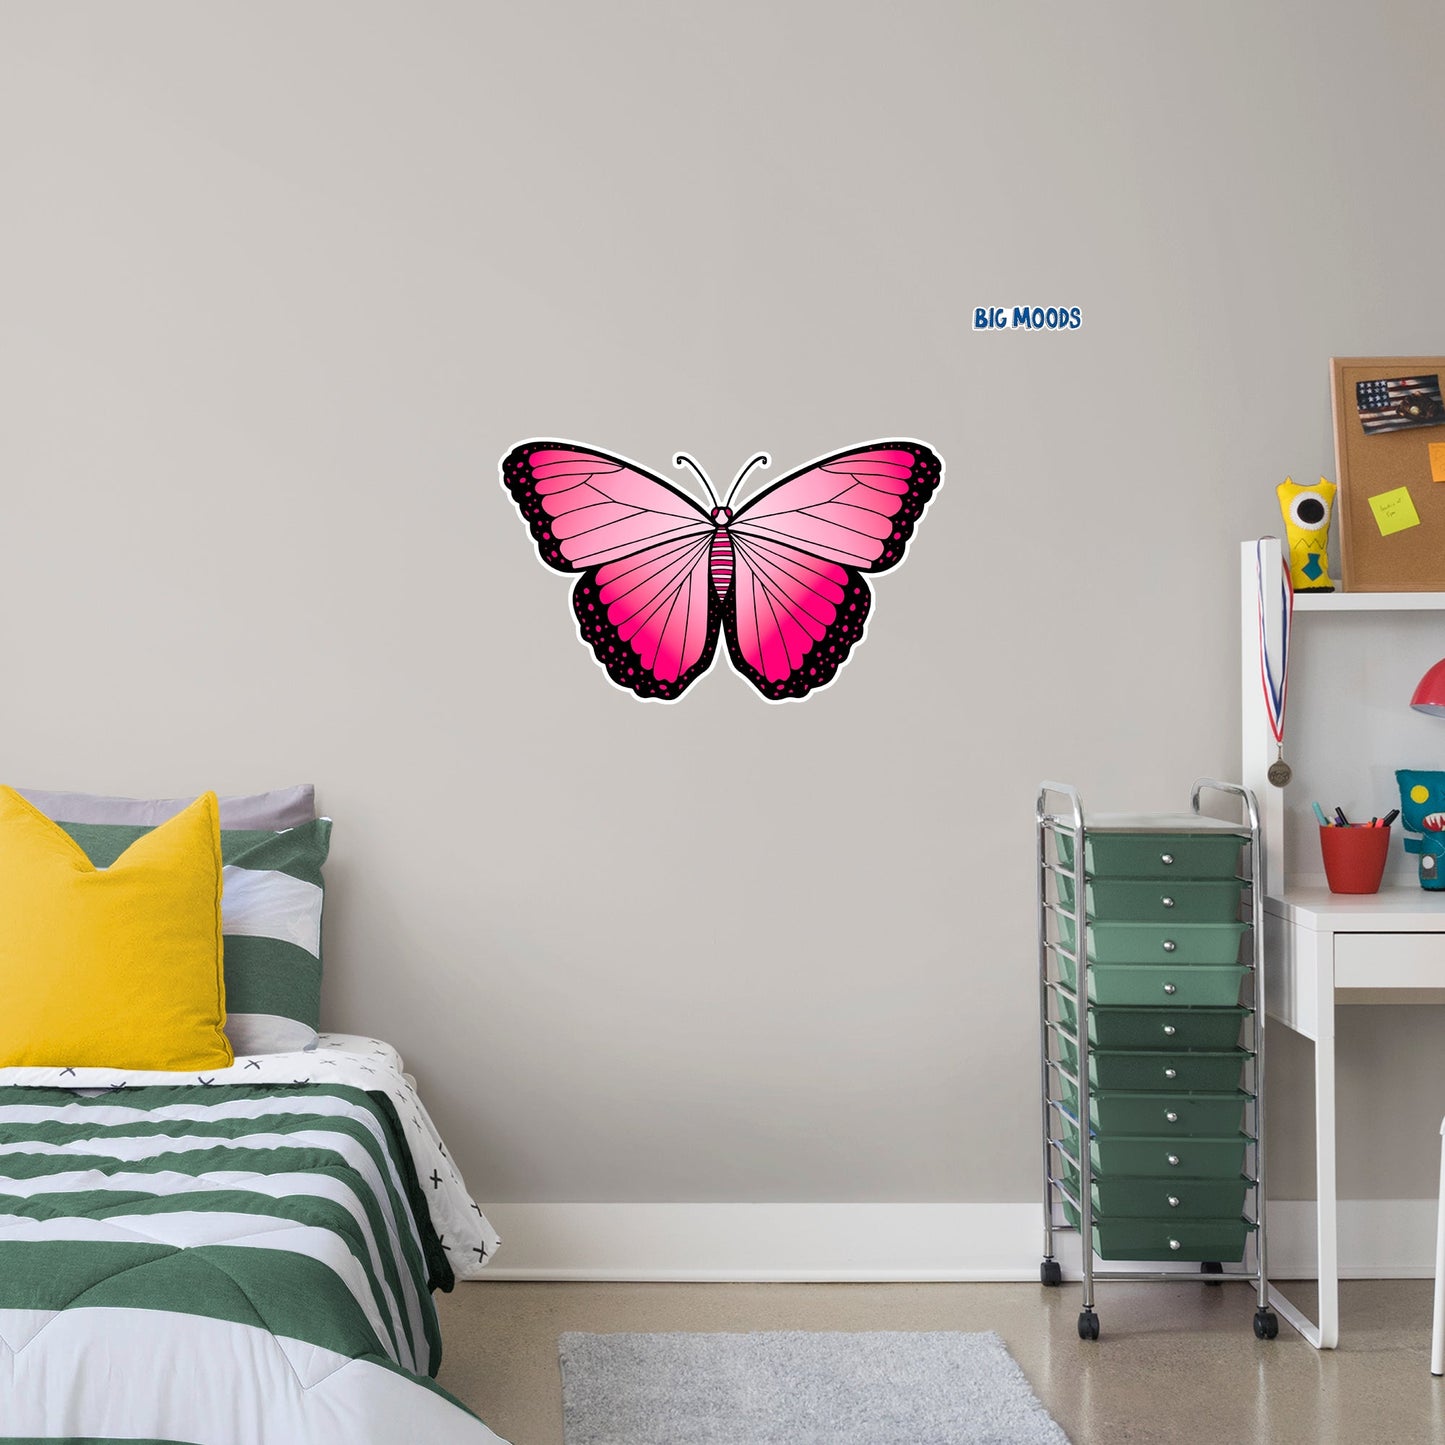 Butterfly (Pink)        - Officially Licensed Big Moods Removable     Adhesive Decal